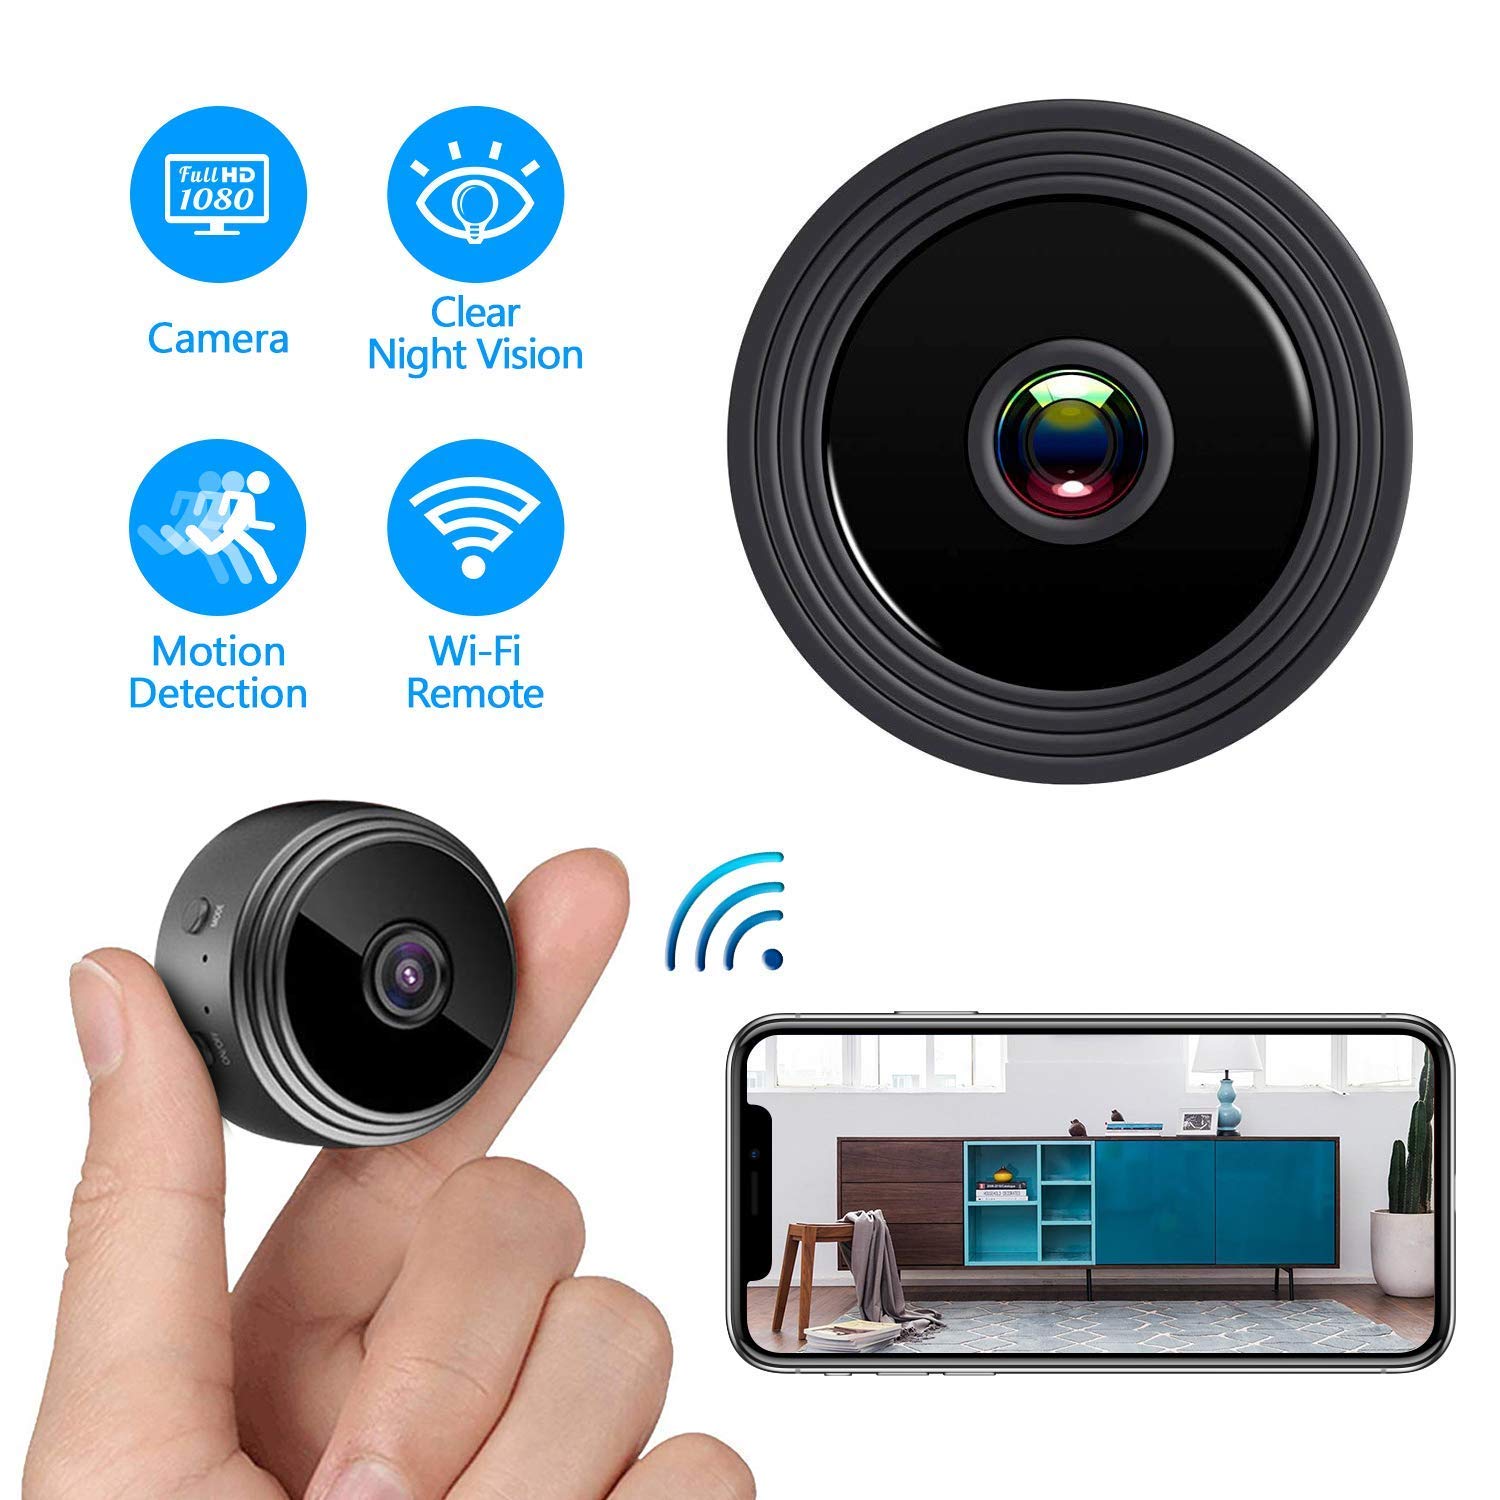 Night Vision & Instant Alerts NuCam Yieye WiFi Photo Frame Hidden Spy Camera for Home/Office Security & Pet/Kid Surveillance w Bonus 64GB SD Card Included 1080P HD 365 Days Battery Life